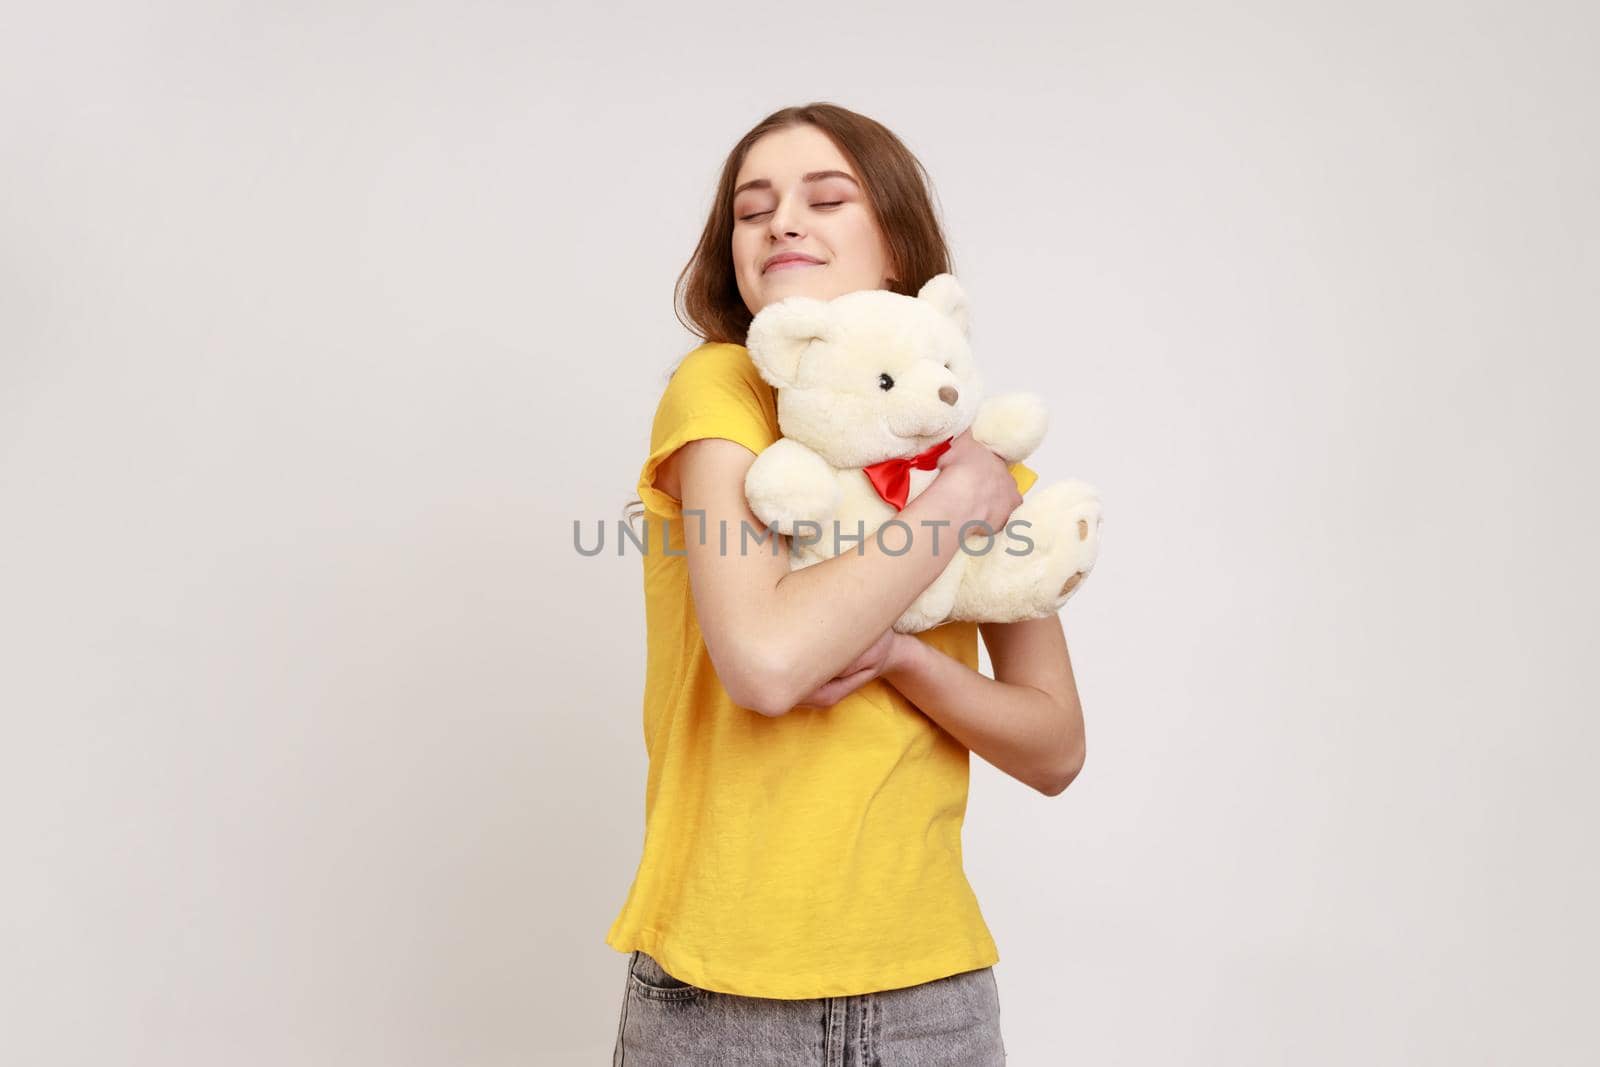 Satisfied happy teenager girl with brown hair in yellow casual T-shirt hugging cute white toy bear, closing eyes and dreaming, enjoying romantic gift. Indoor studio shot isolated on gray background.